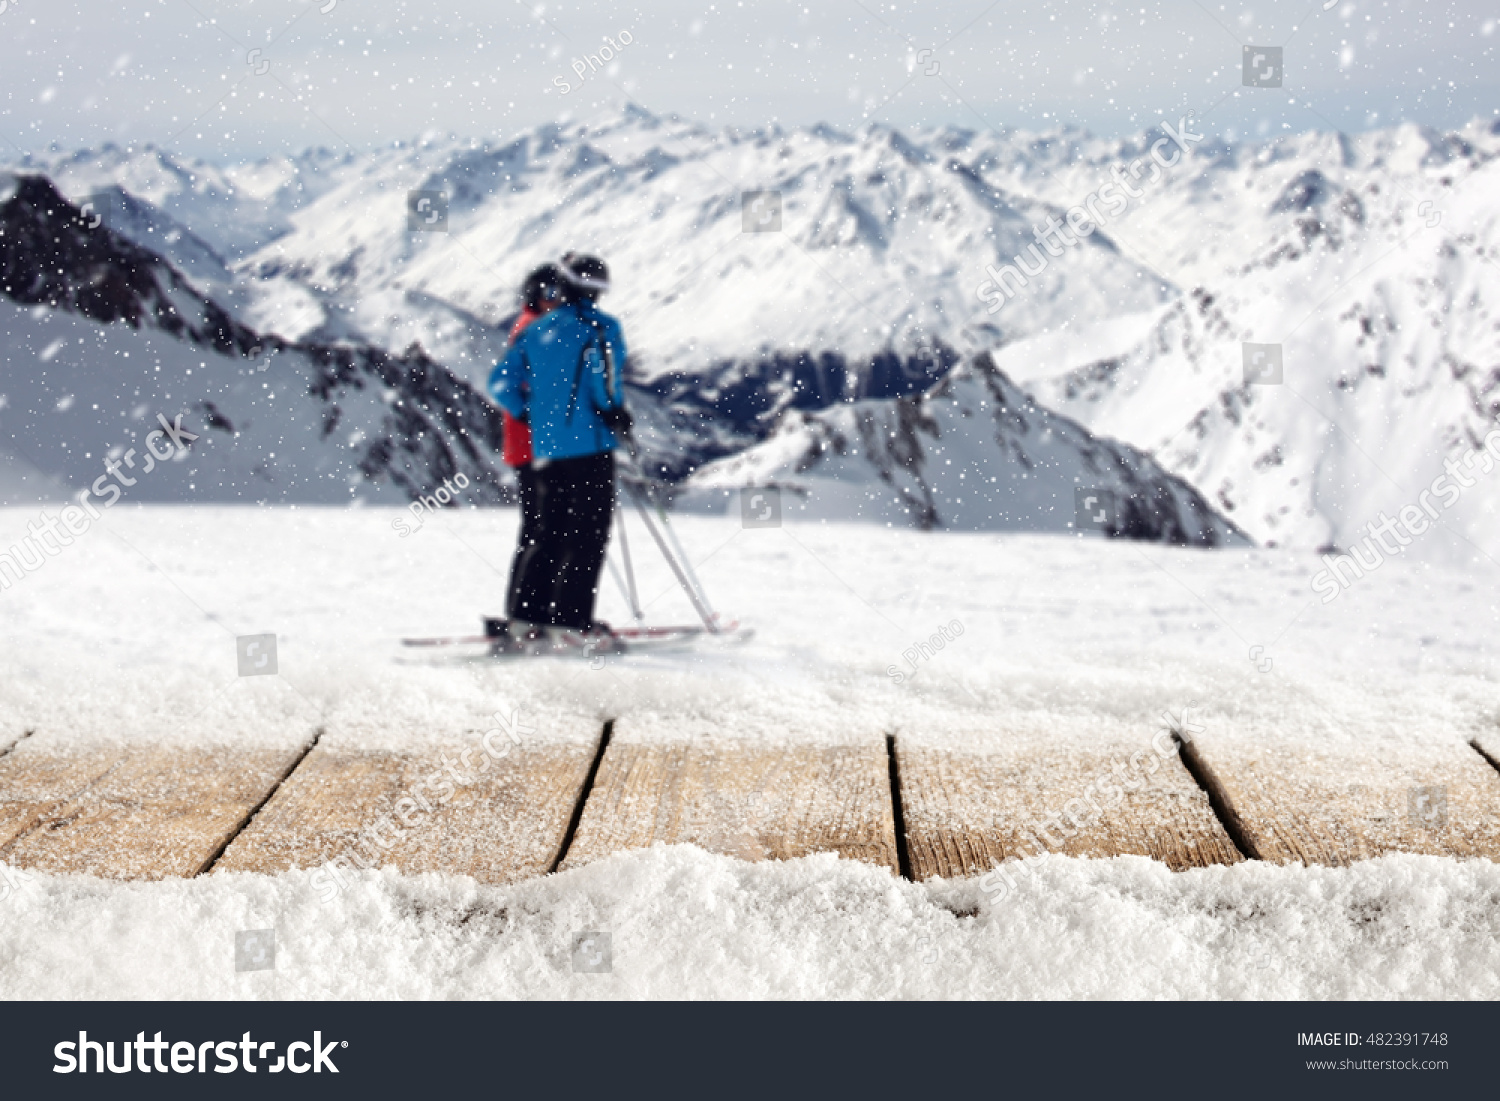 wooden table full of snow flakes and landscape of Alps with skier  #482391748